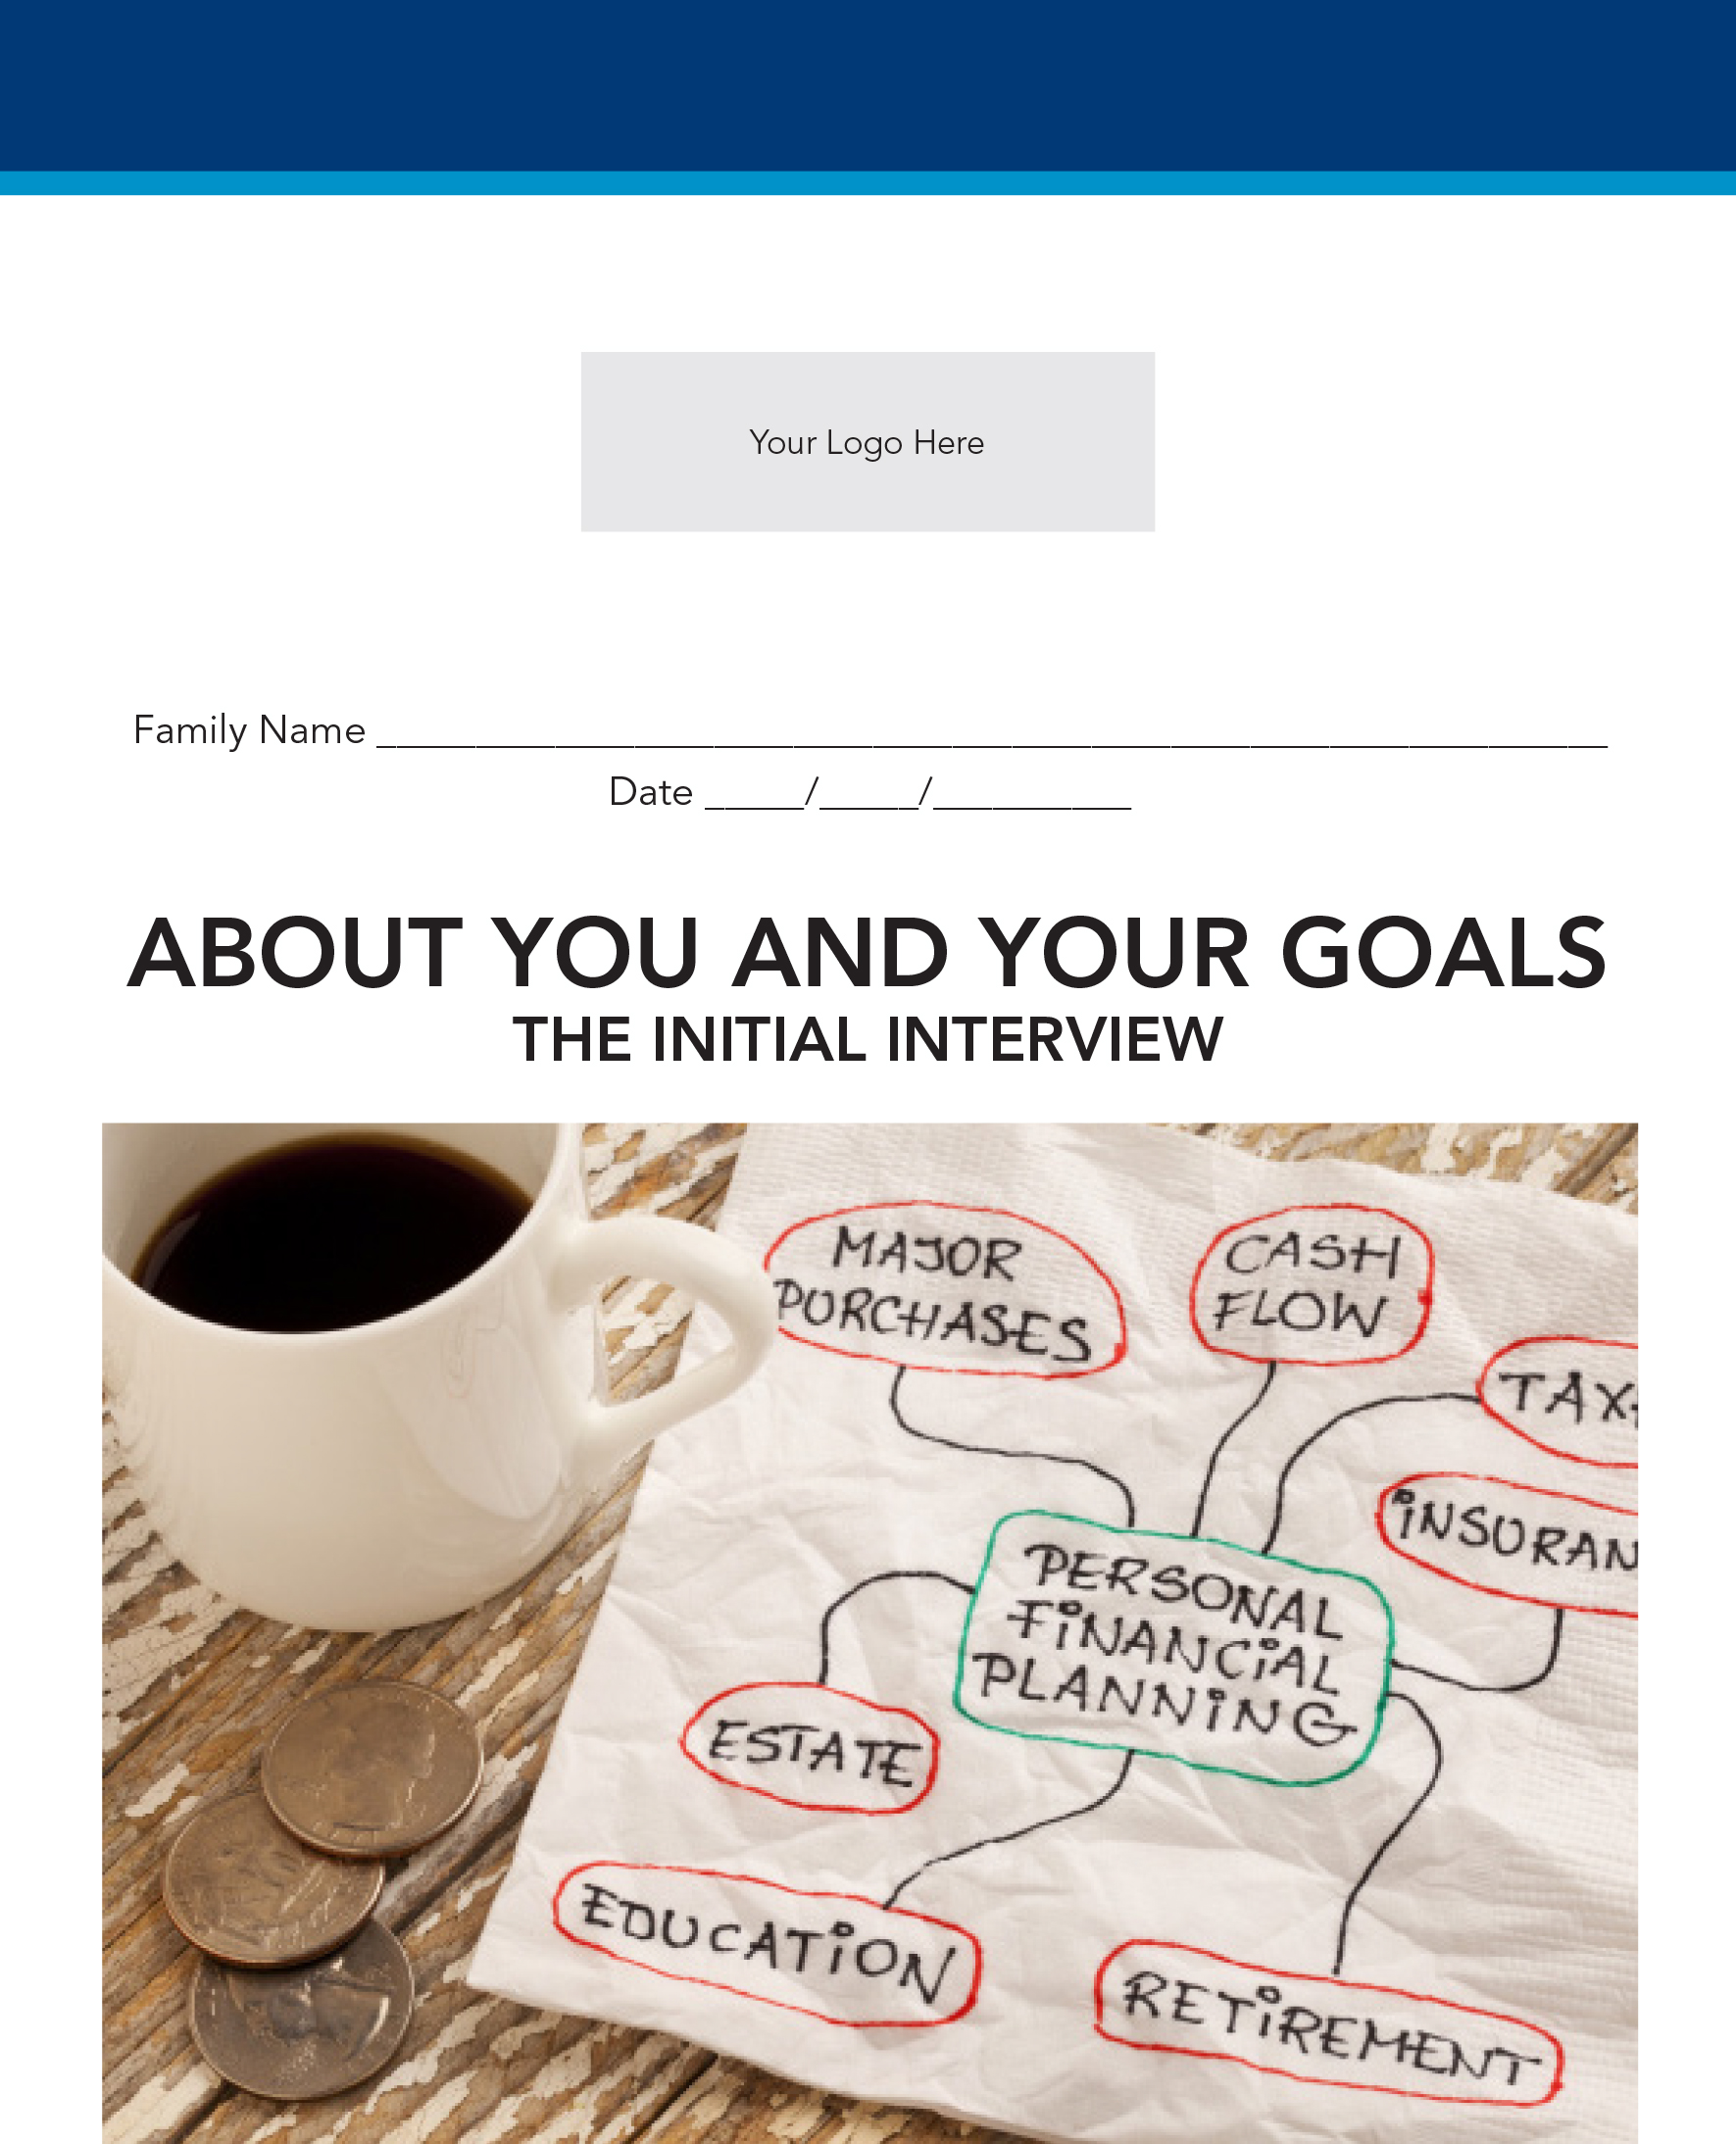 The Initial Interview Booklet